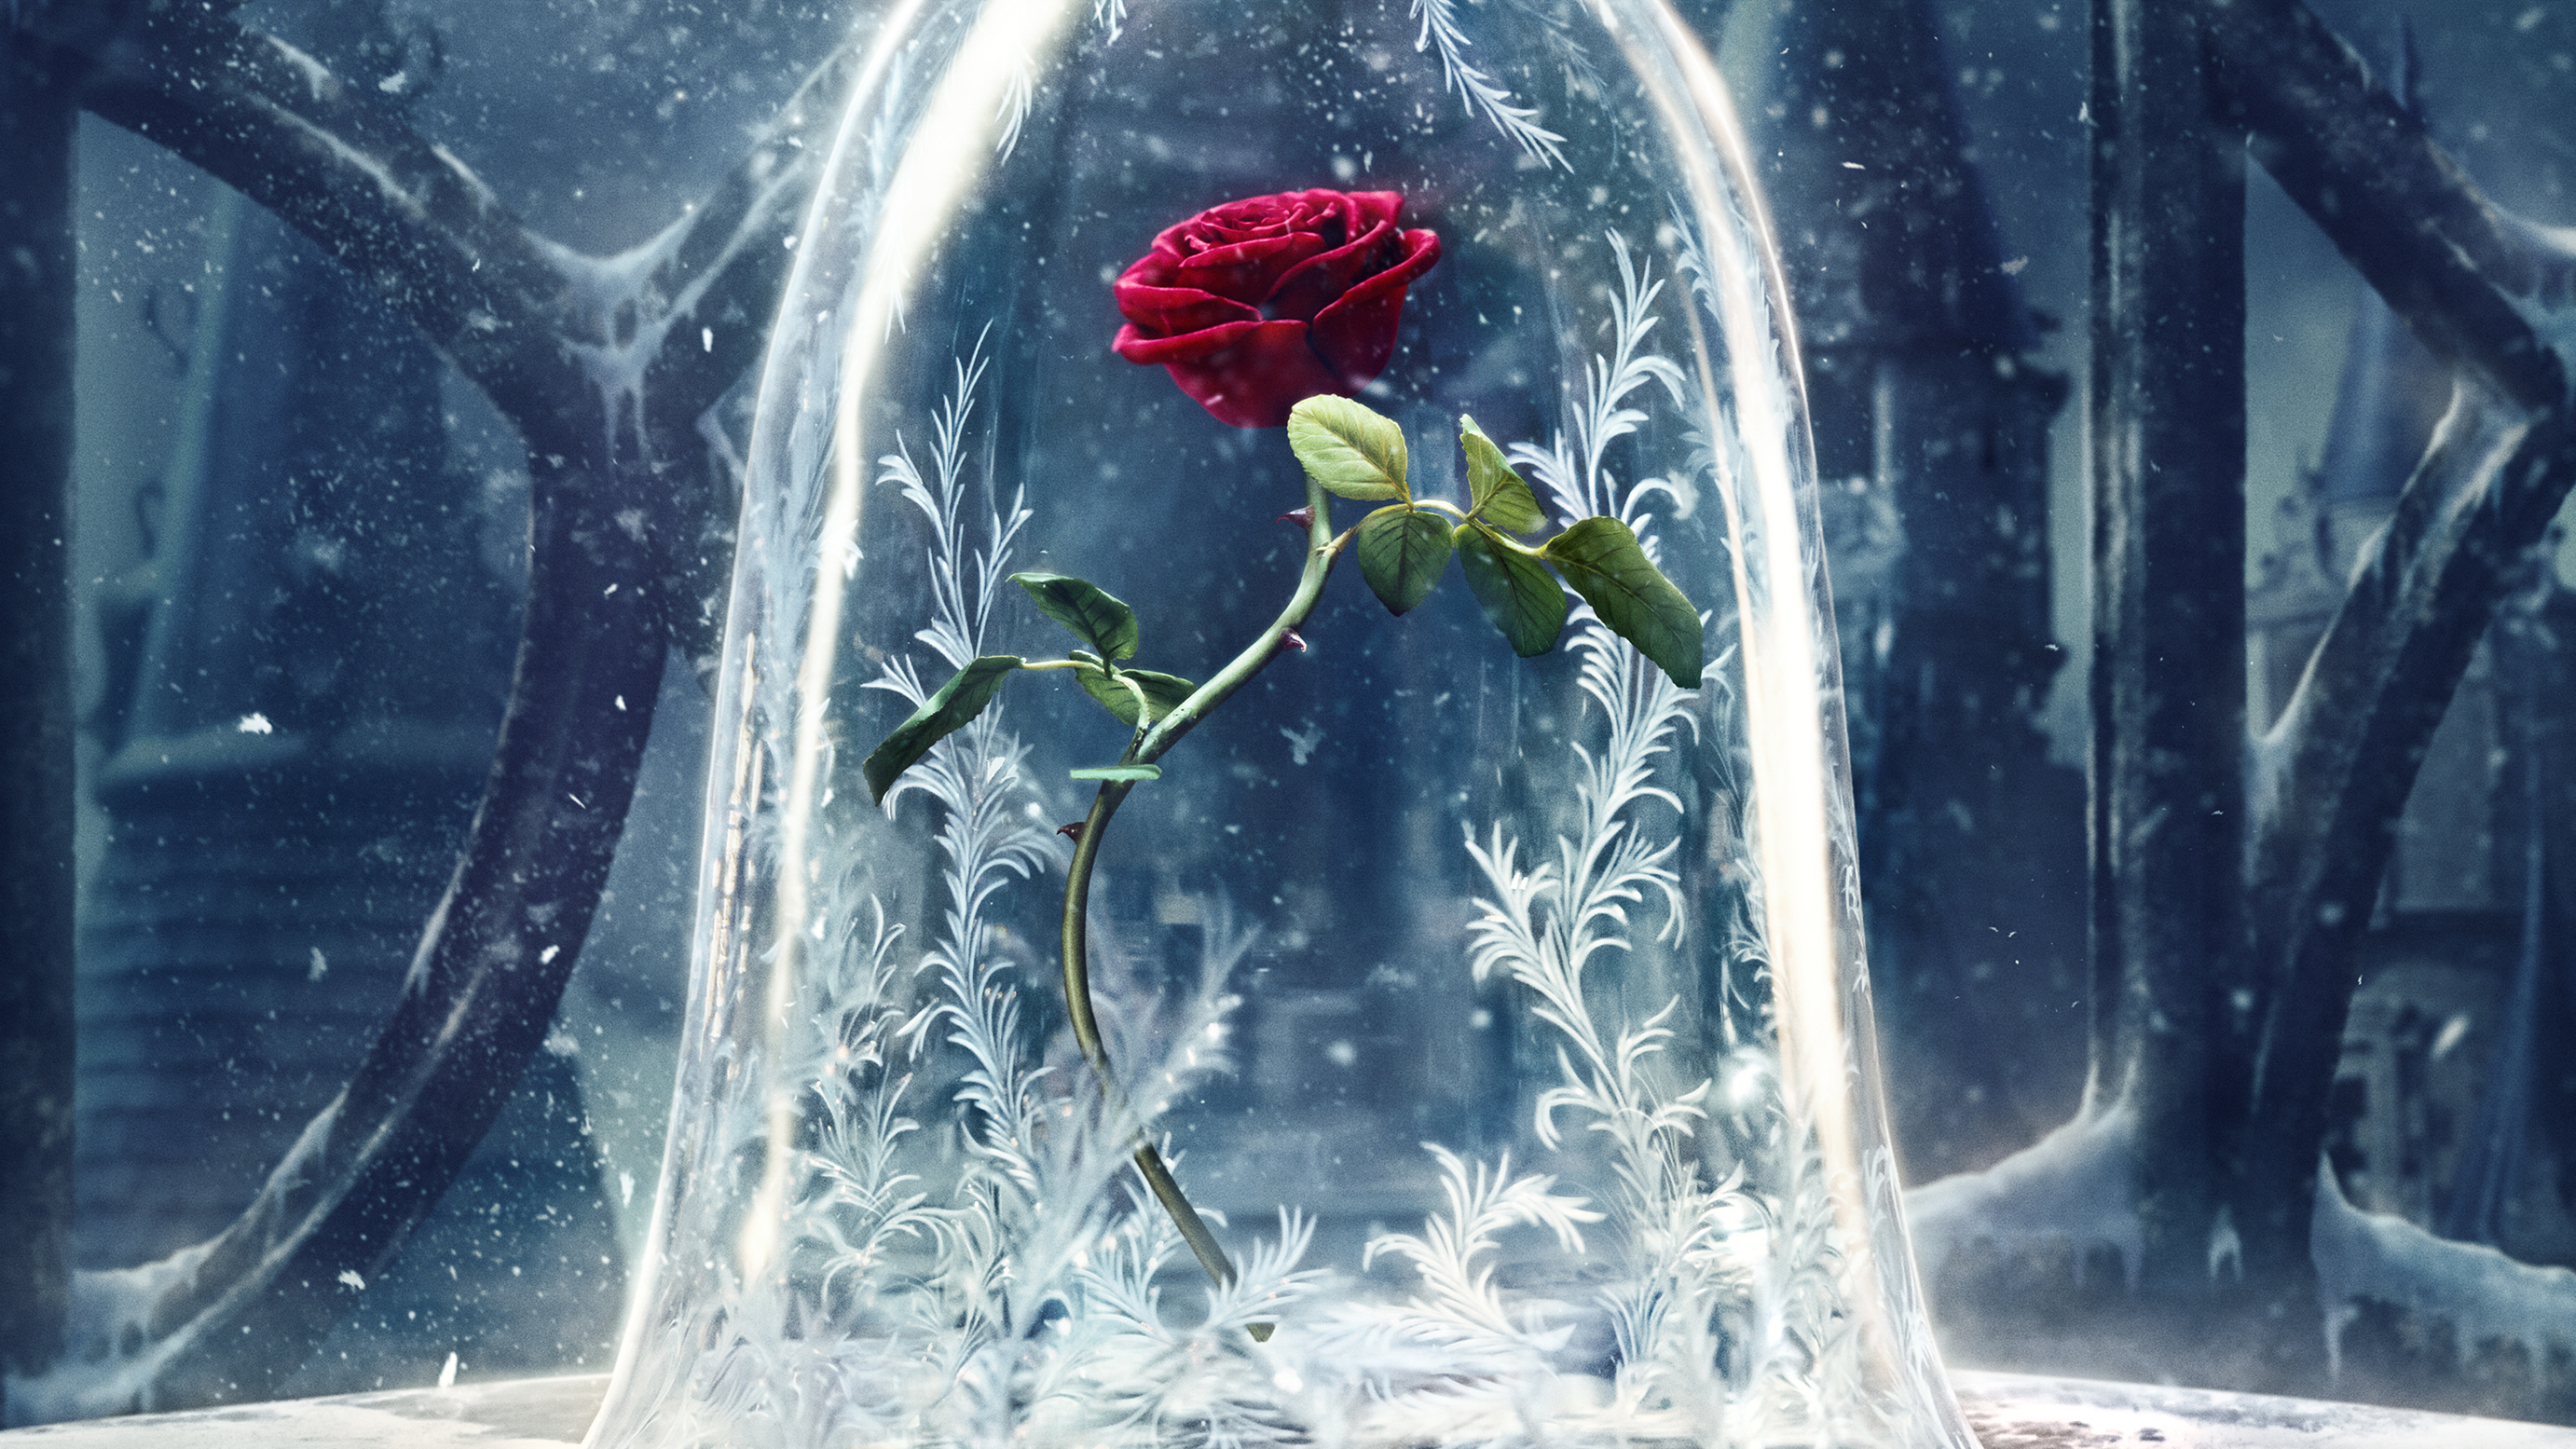 Wallpaper Beauty and the Beast, 2017 Movies, Disney, Rose, Movies